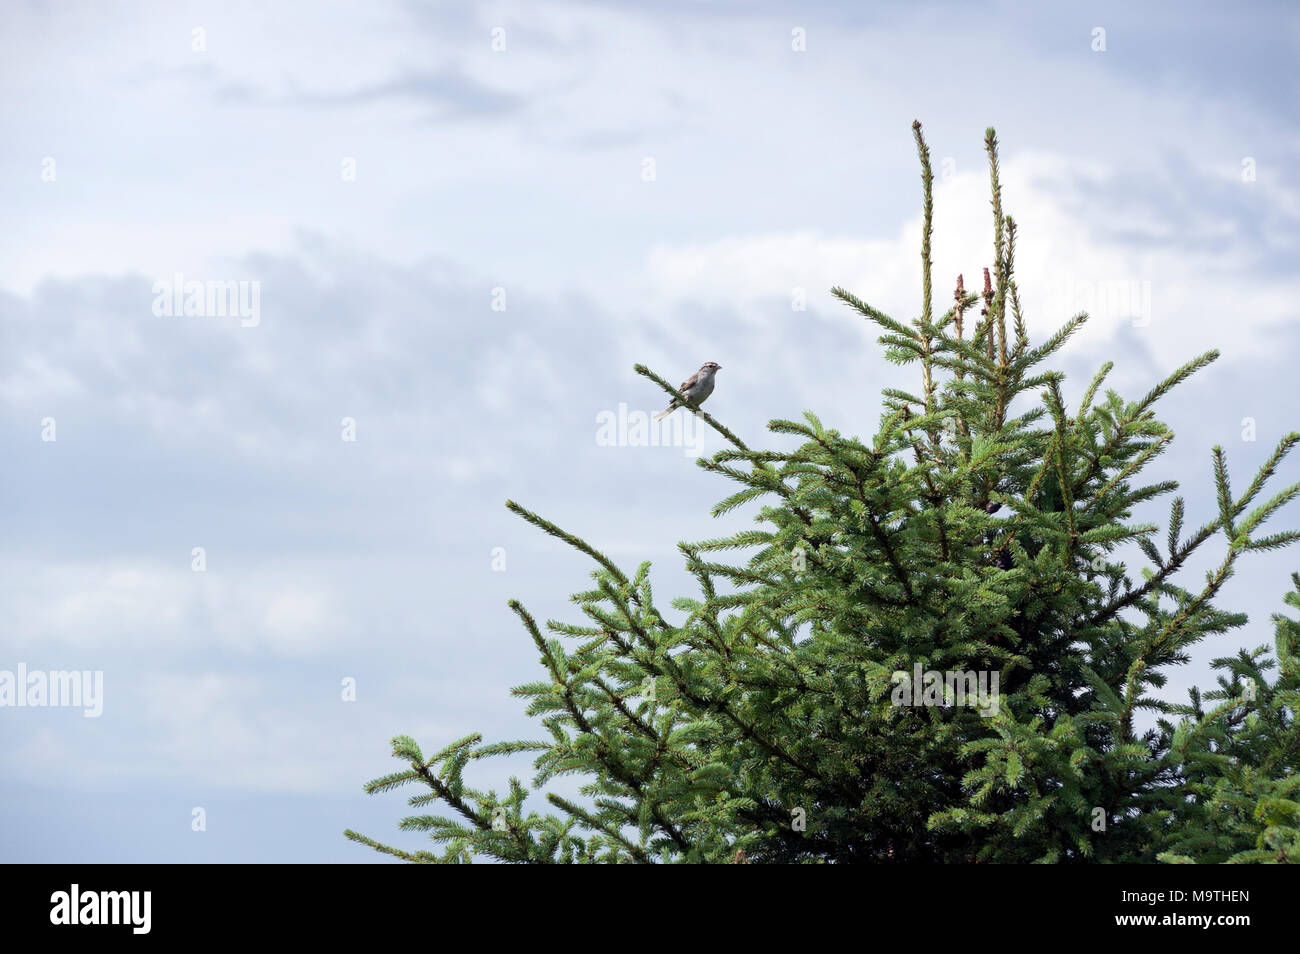 American Tree Sparrow, Spizelloides arborea, perched in spruce tree Stock Photo